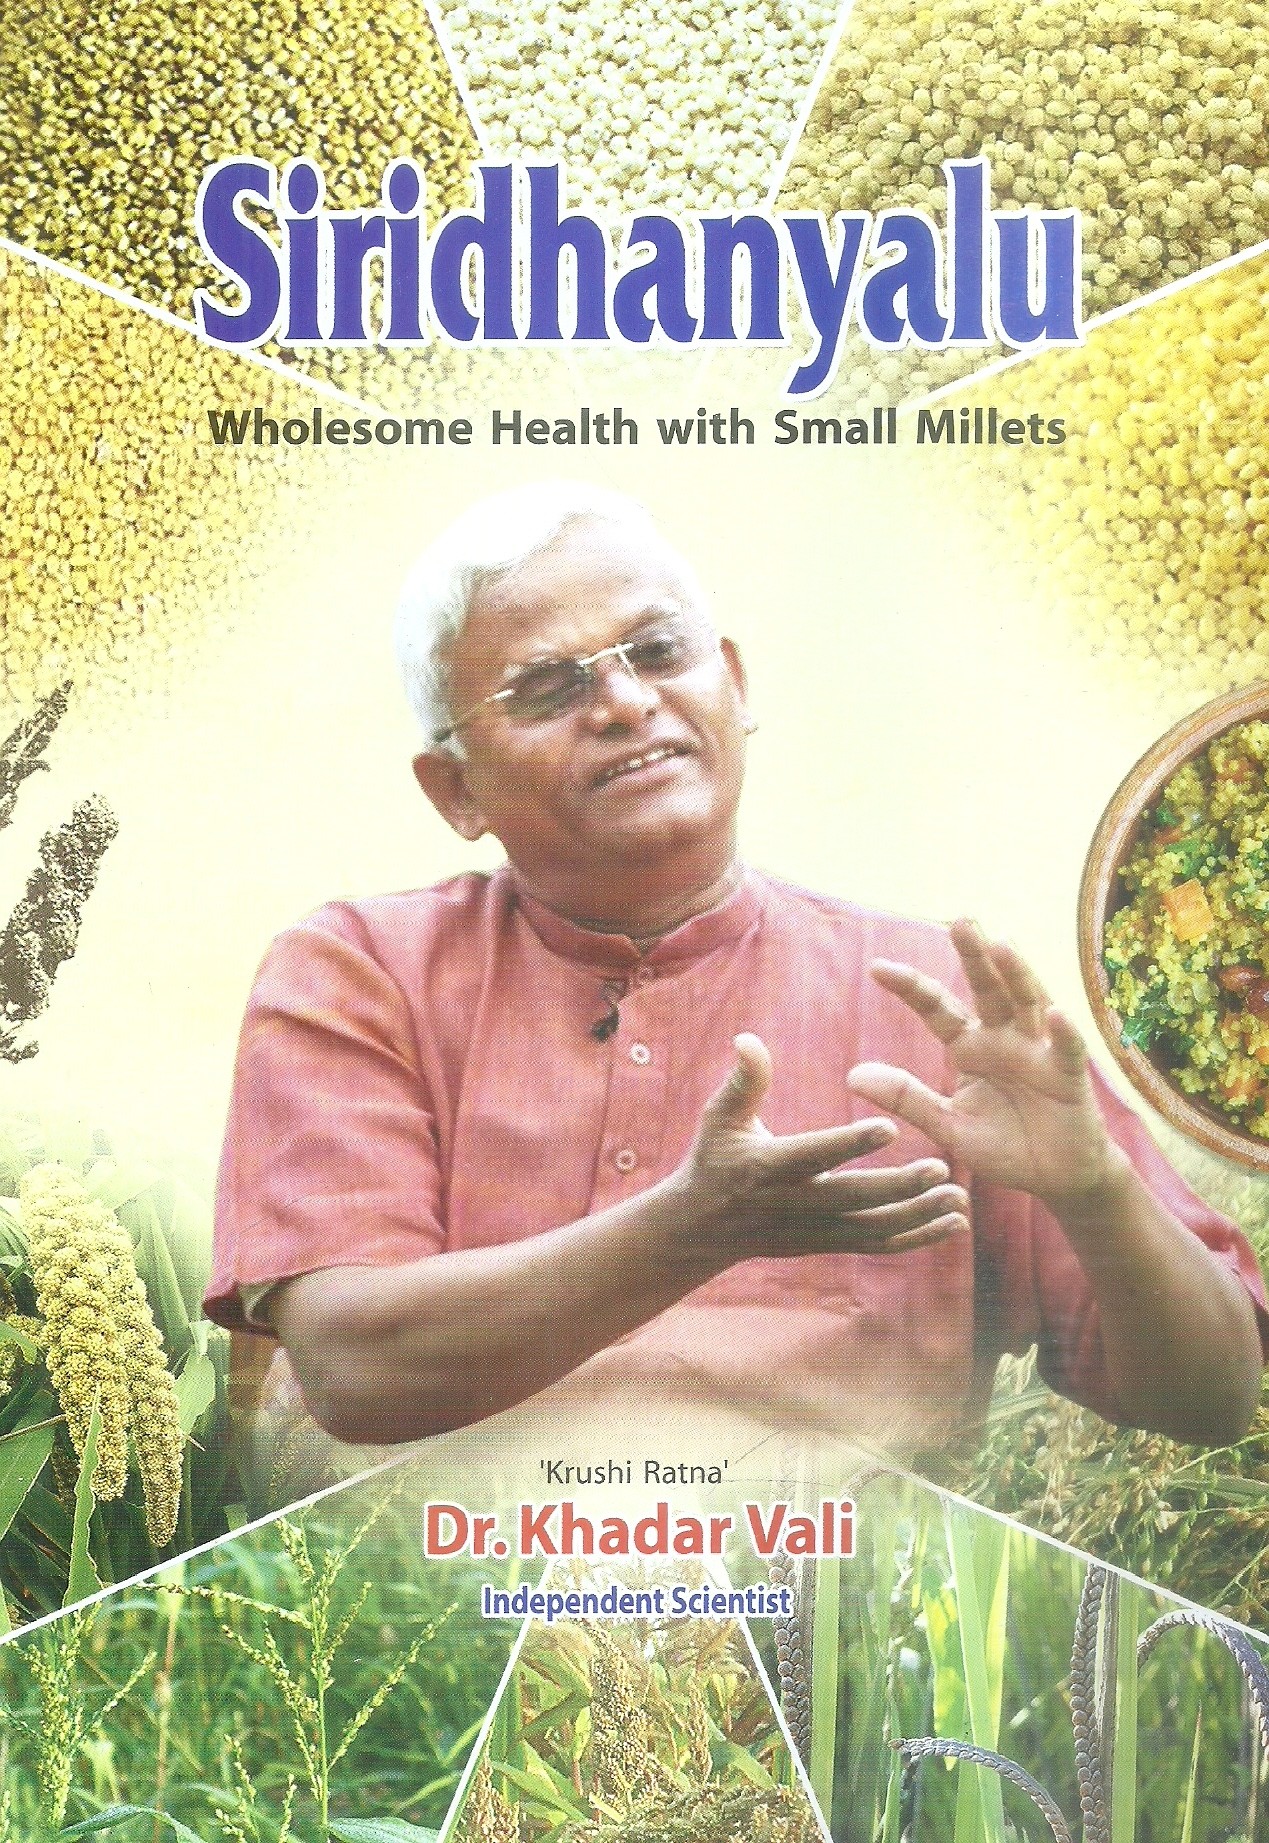 siridhanyalu-wholesome-health-with-small-millets-dr-khadar-vali